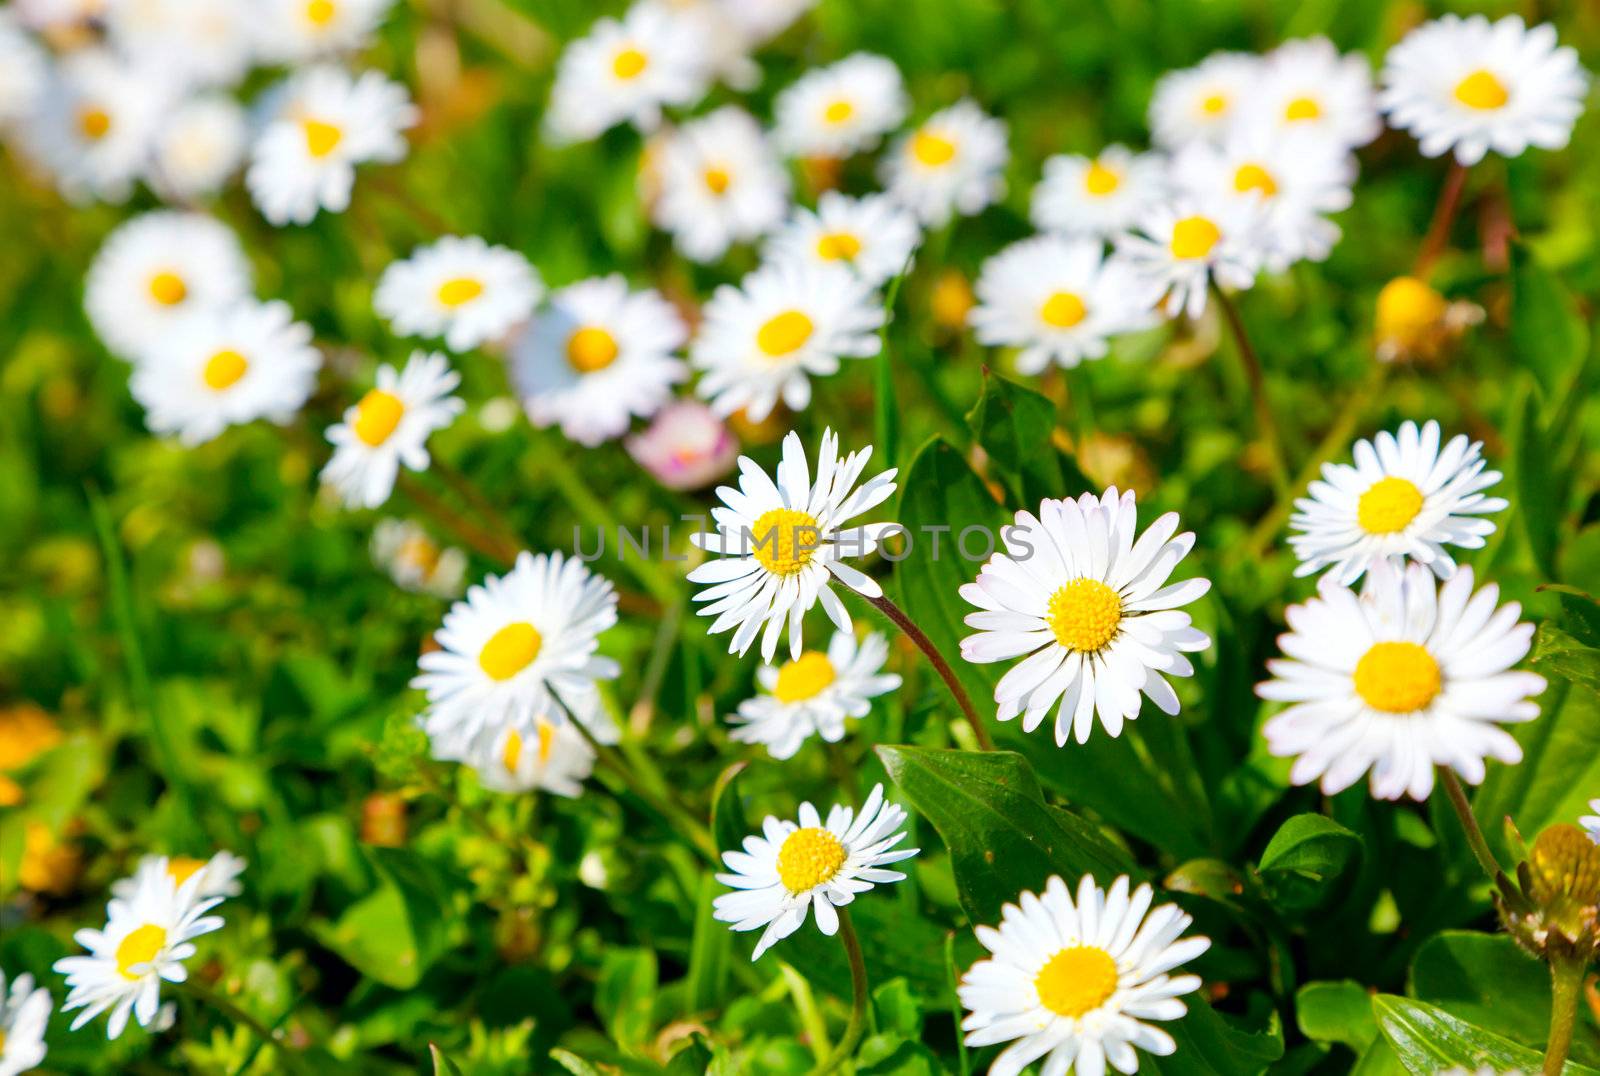 Daisies in a meadow, close-up  by motorolka